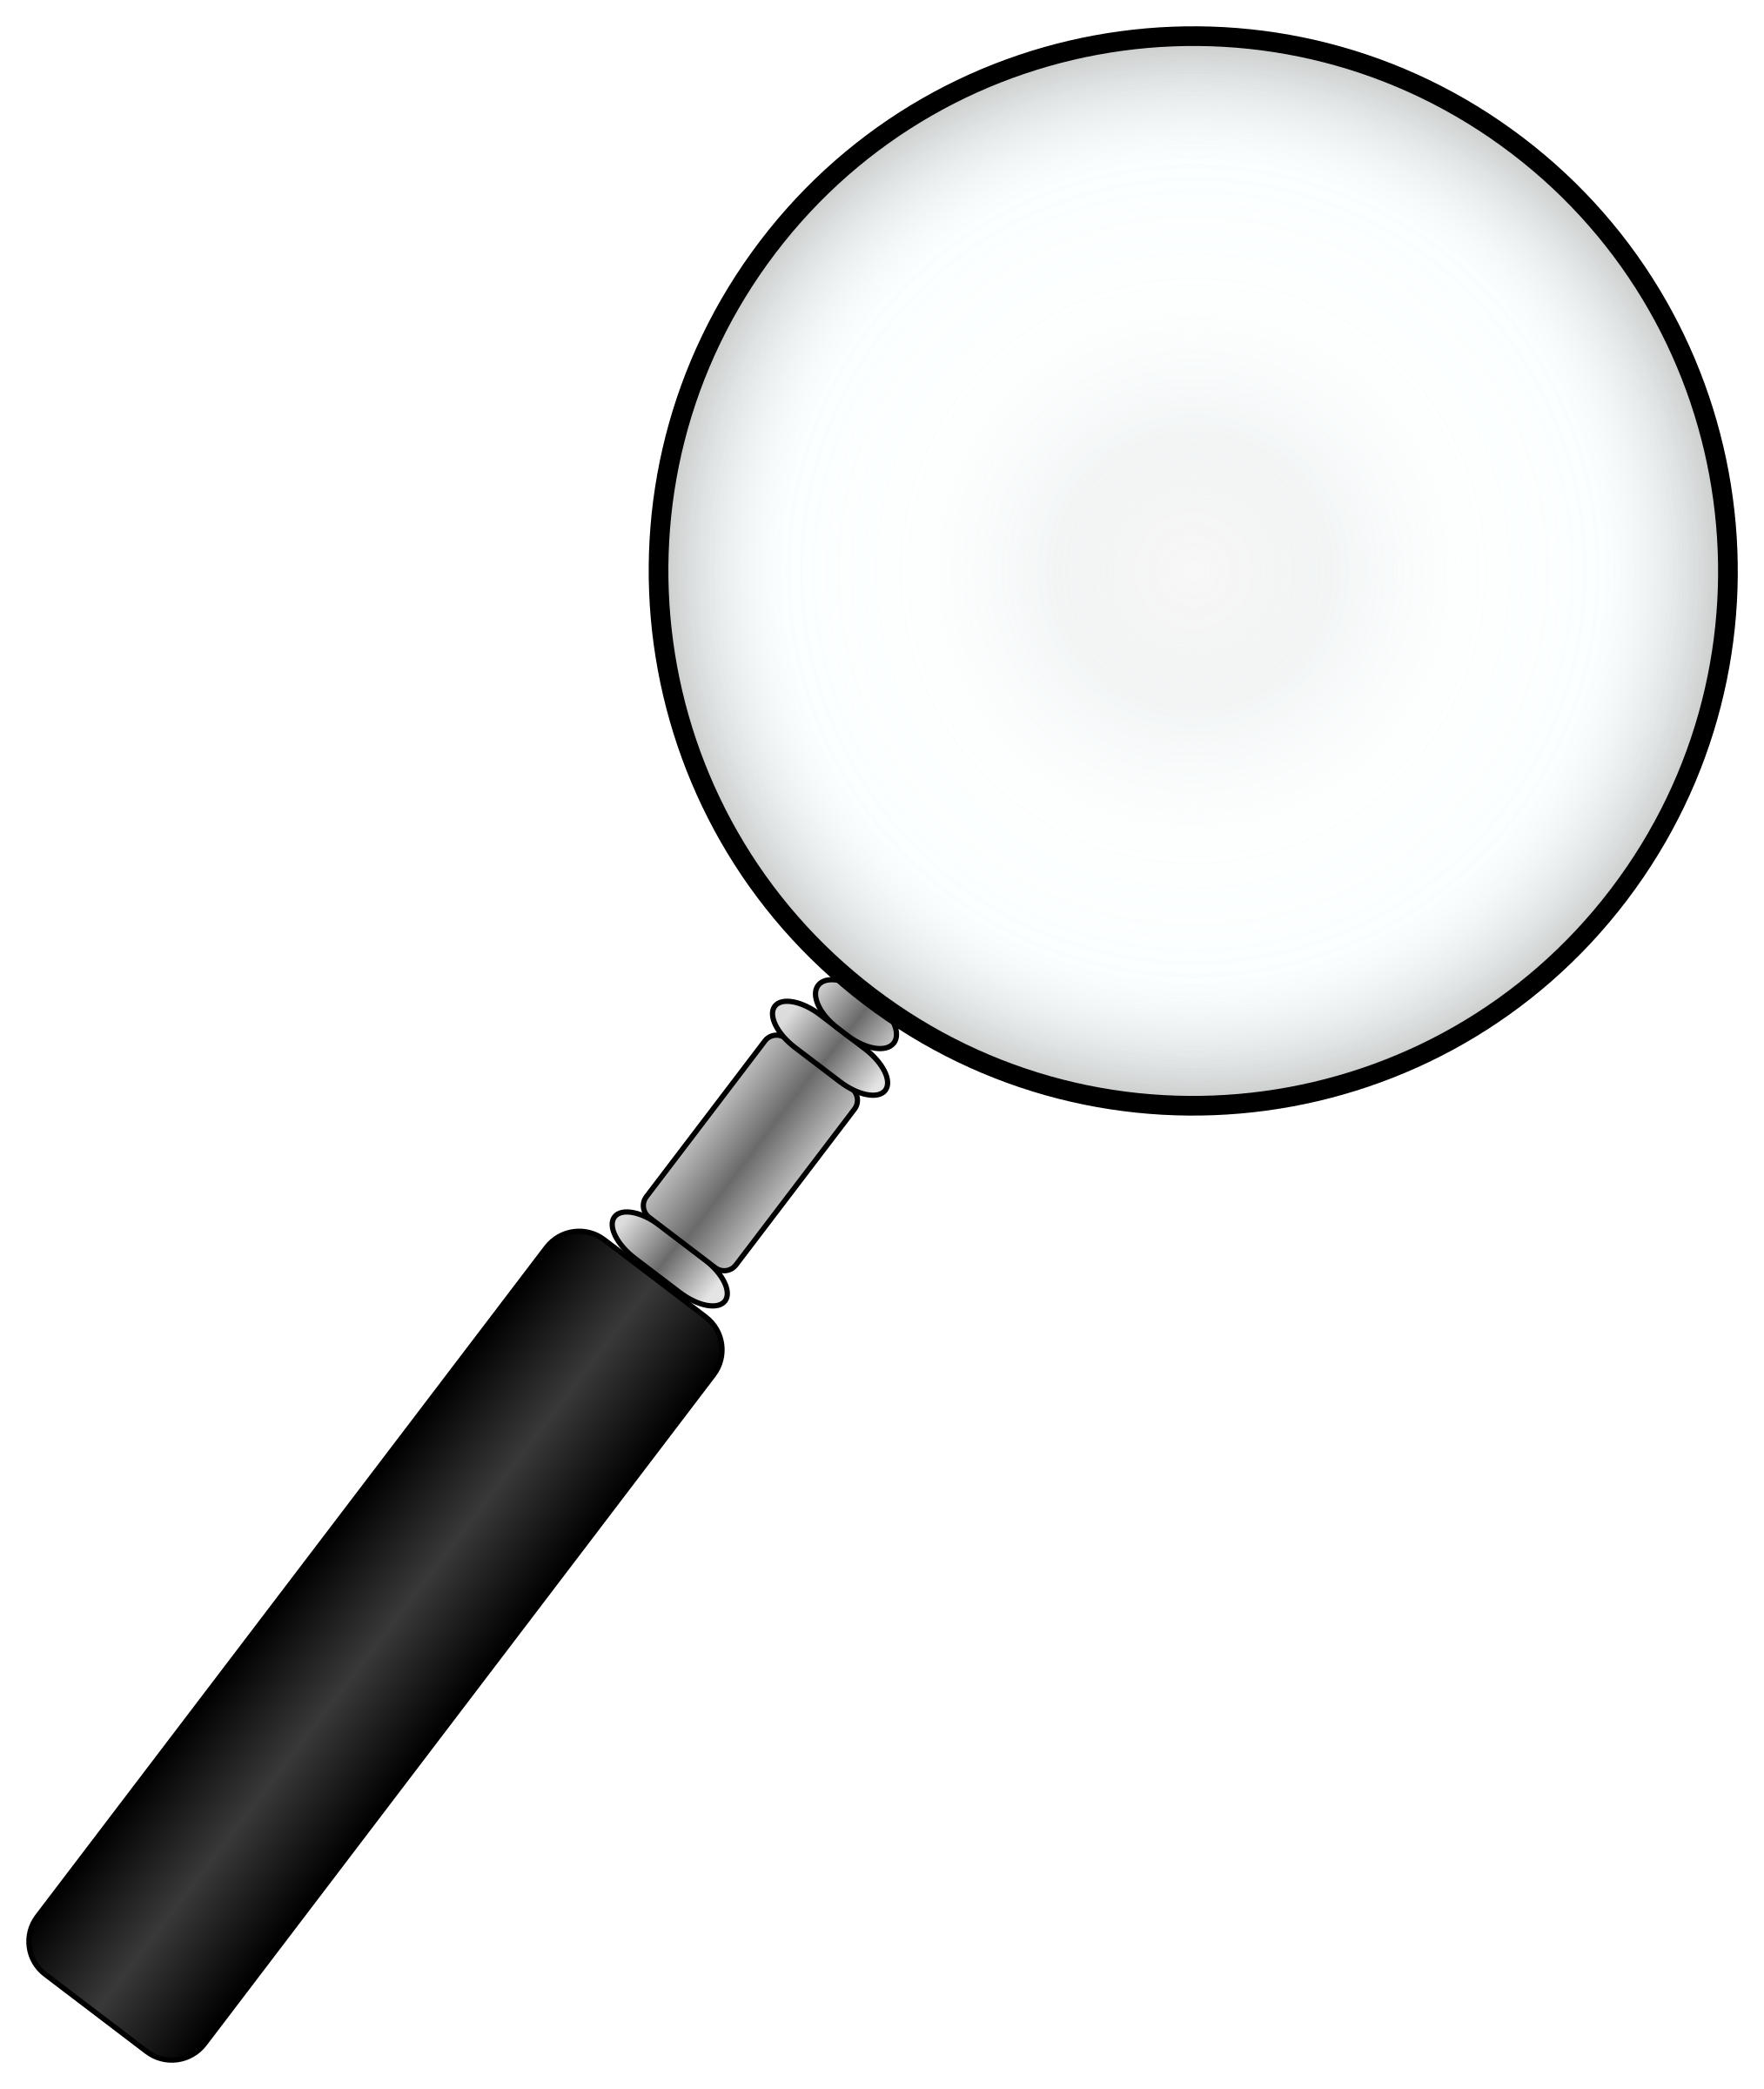 Loupe PNG image transparent image download, size: 2027x2400px